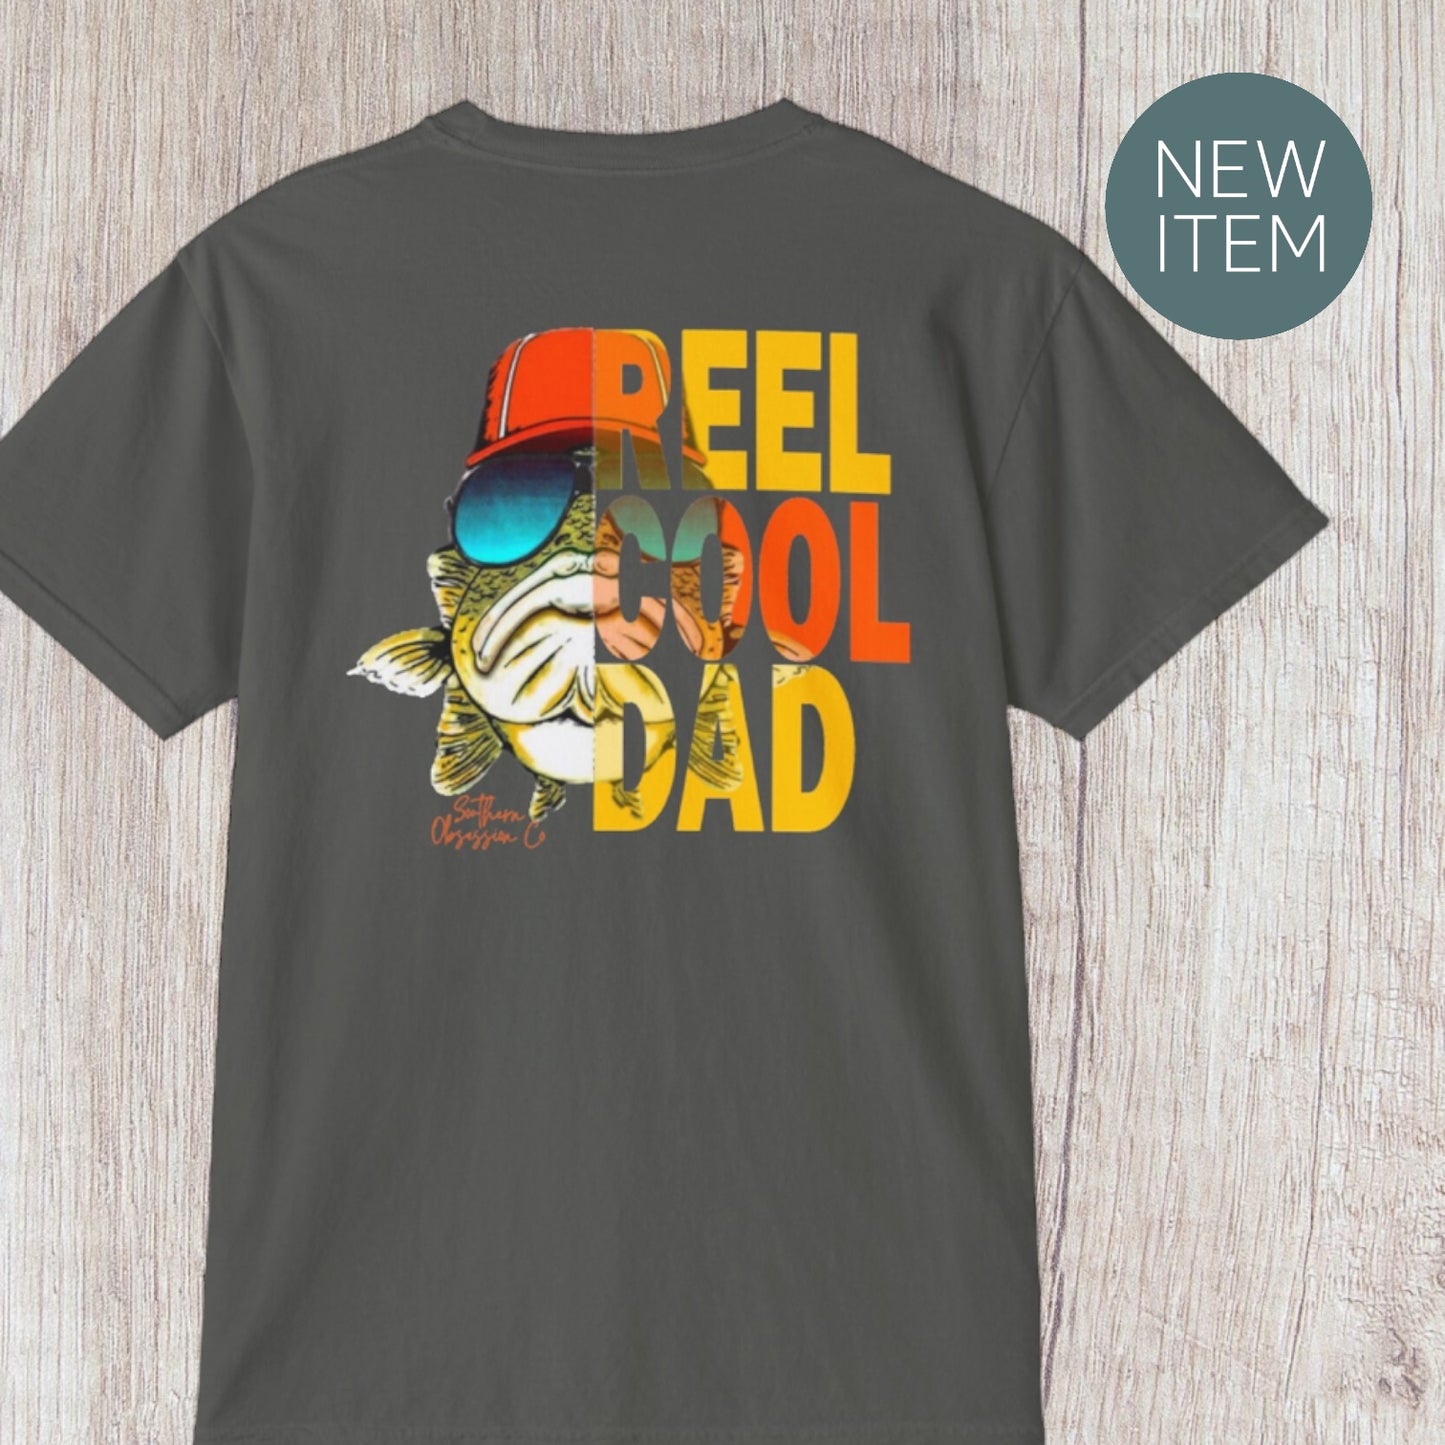 Reel Cool Dad Tee - Southern Obsession Co. 